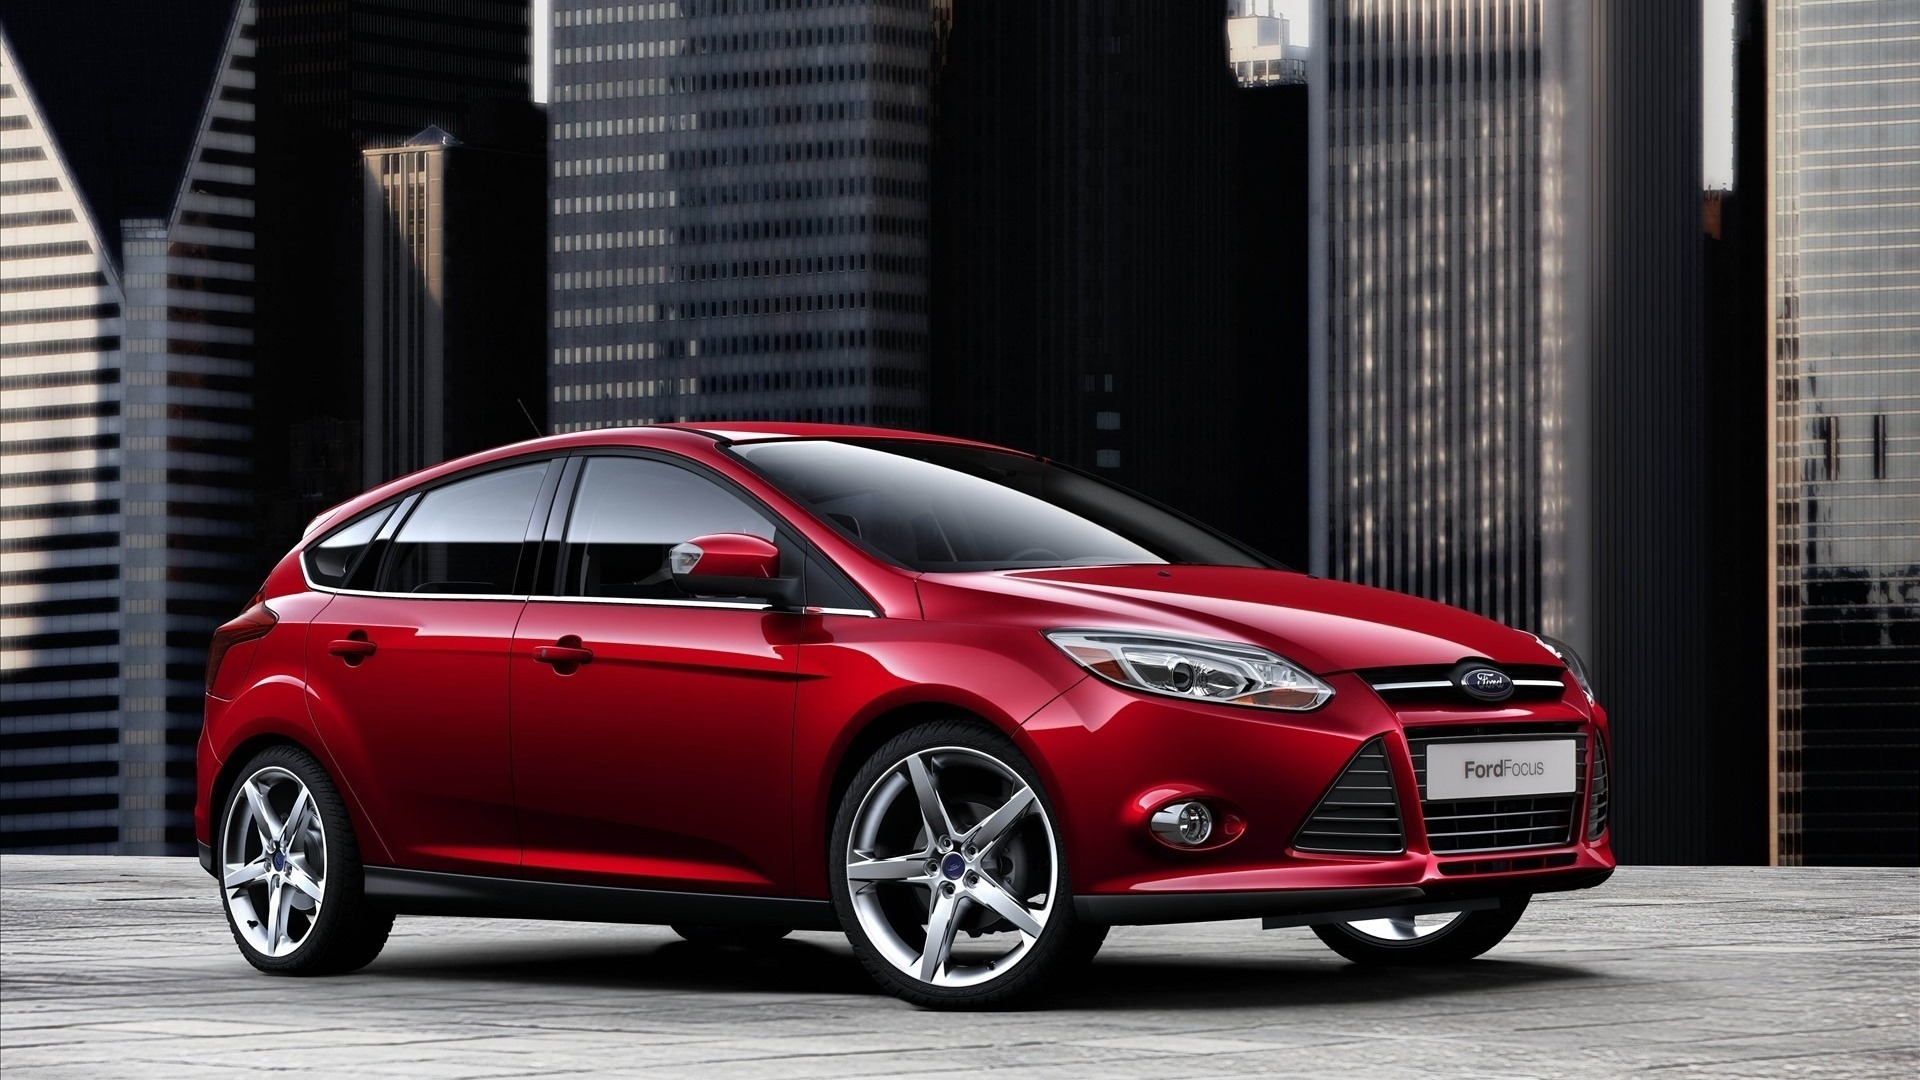 New Ford Focus 2011 for 1920 x 1080 HDTV 1080p resolution